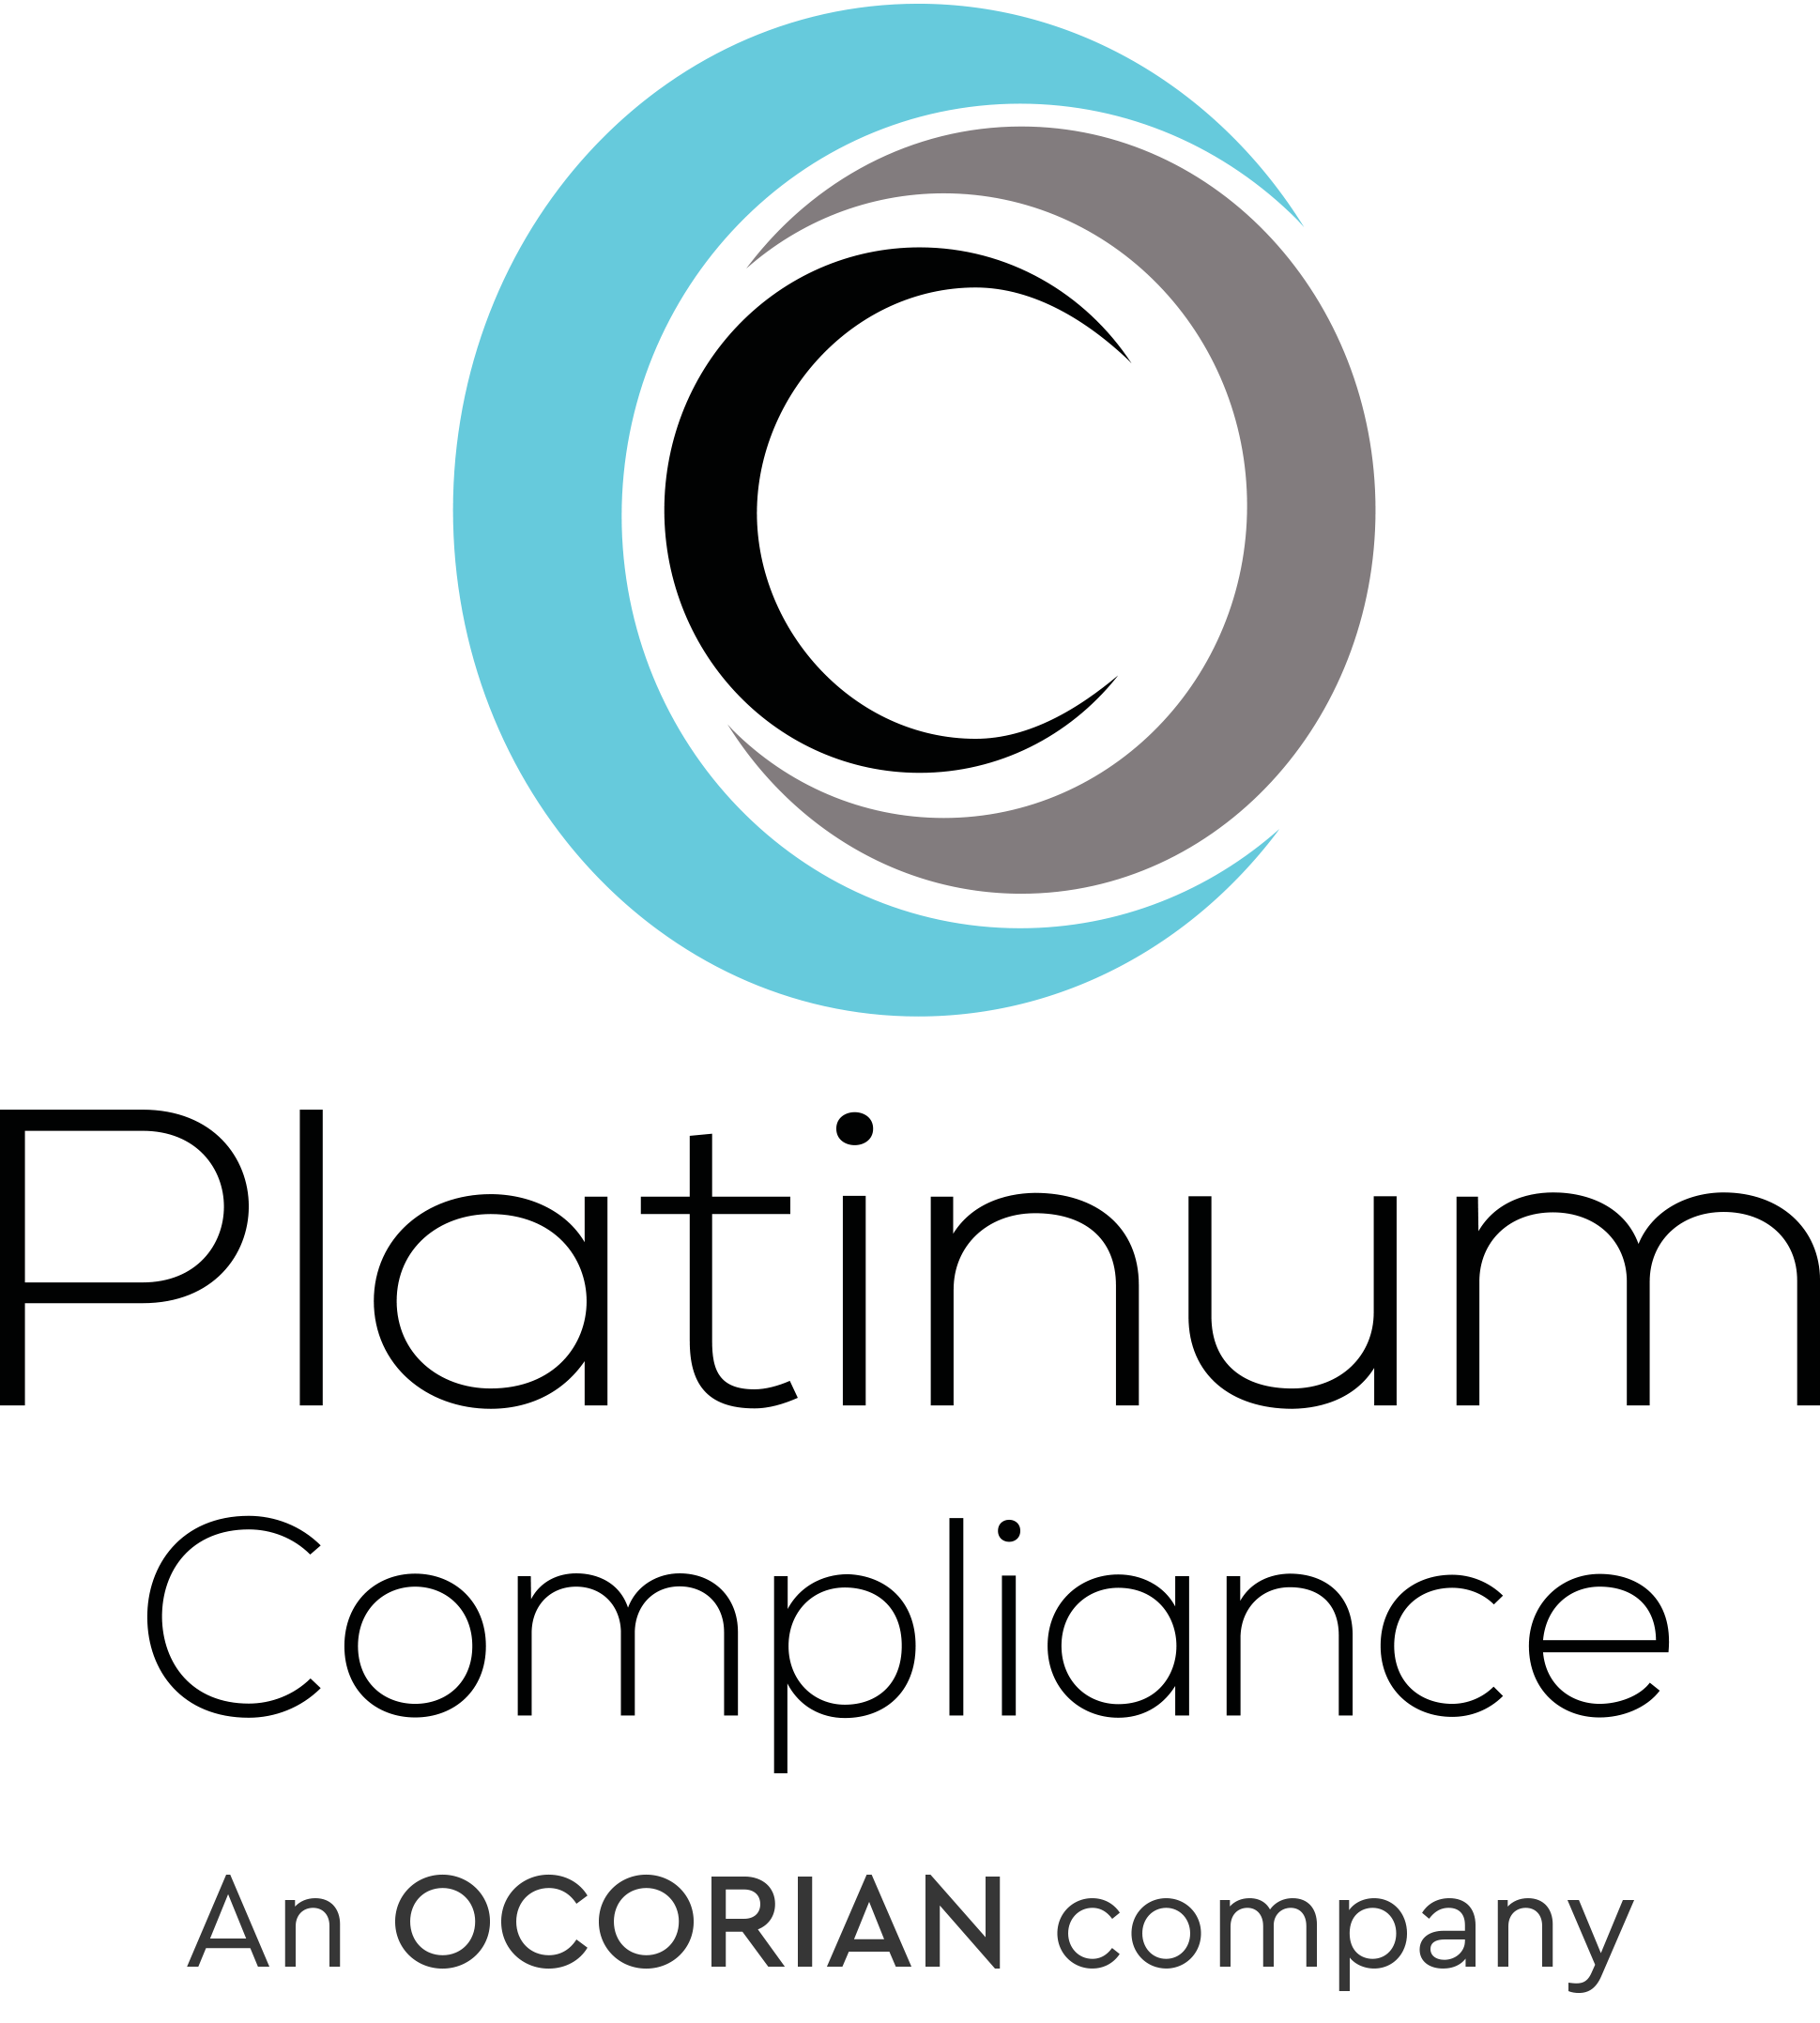 Our compliance and legal brands